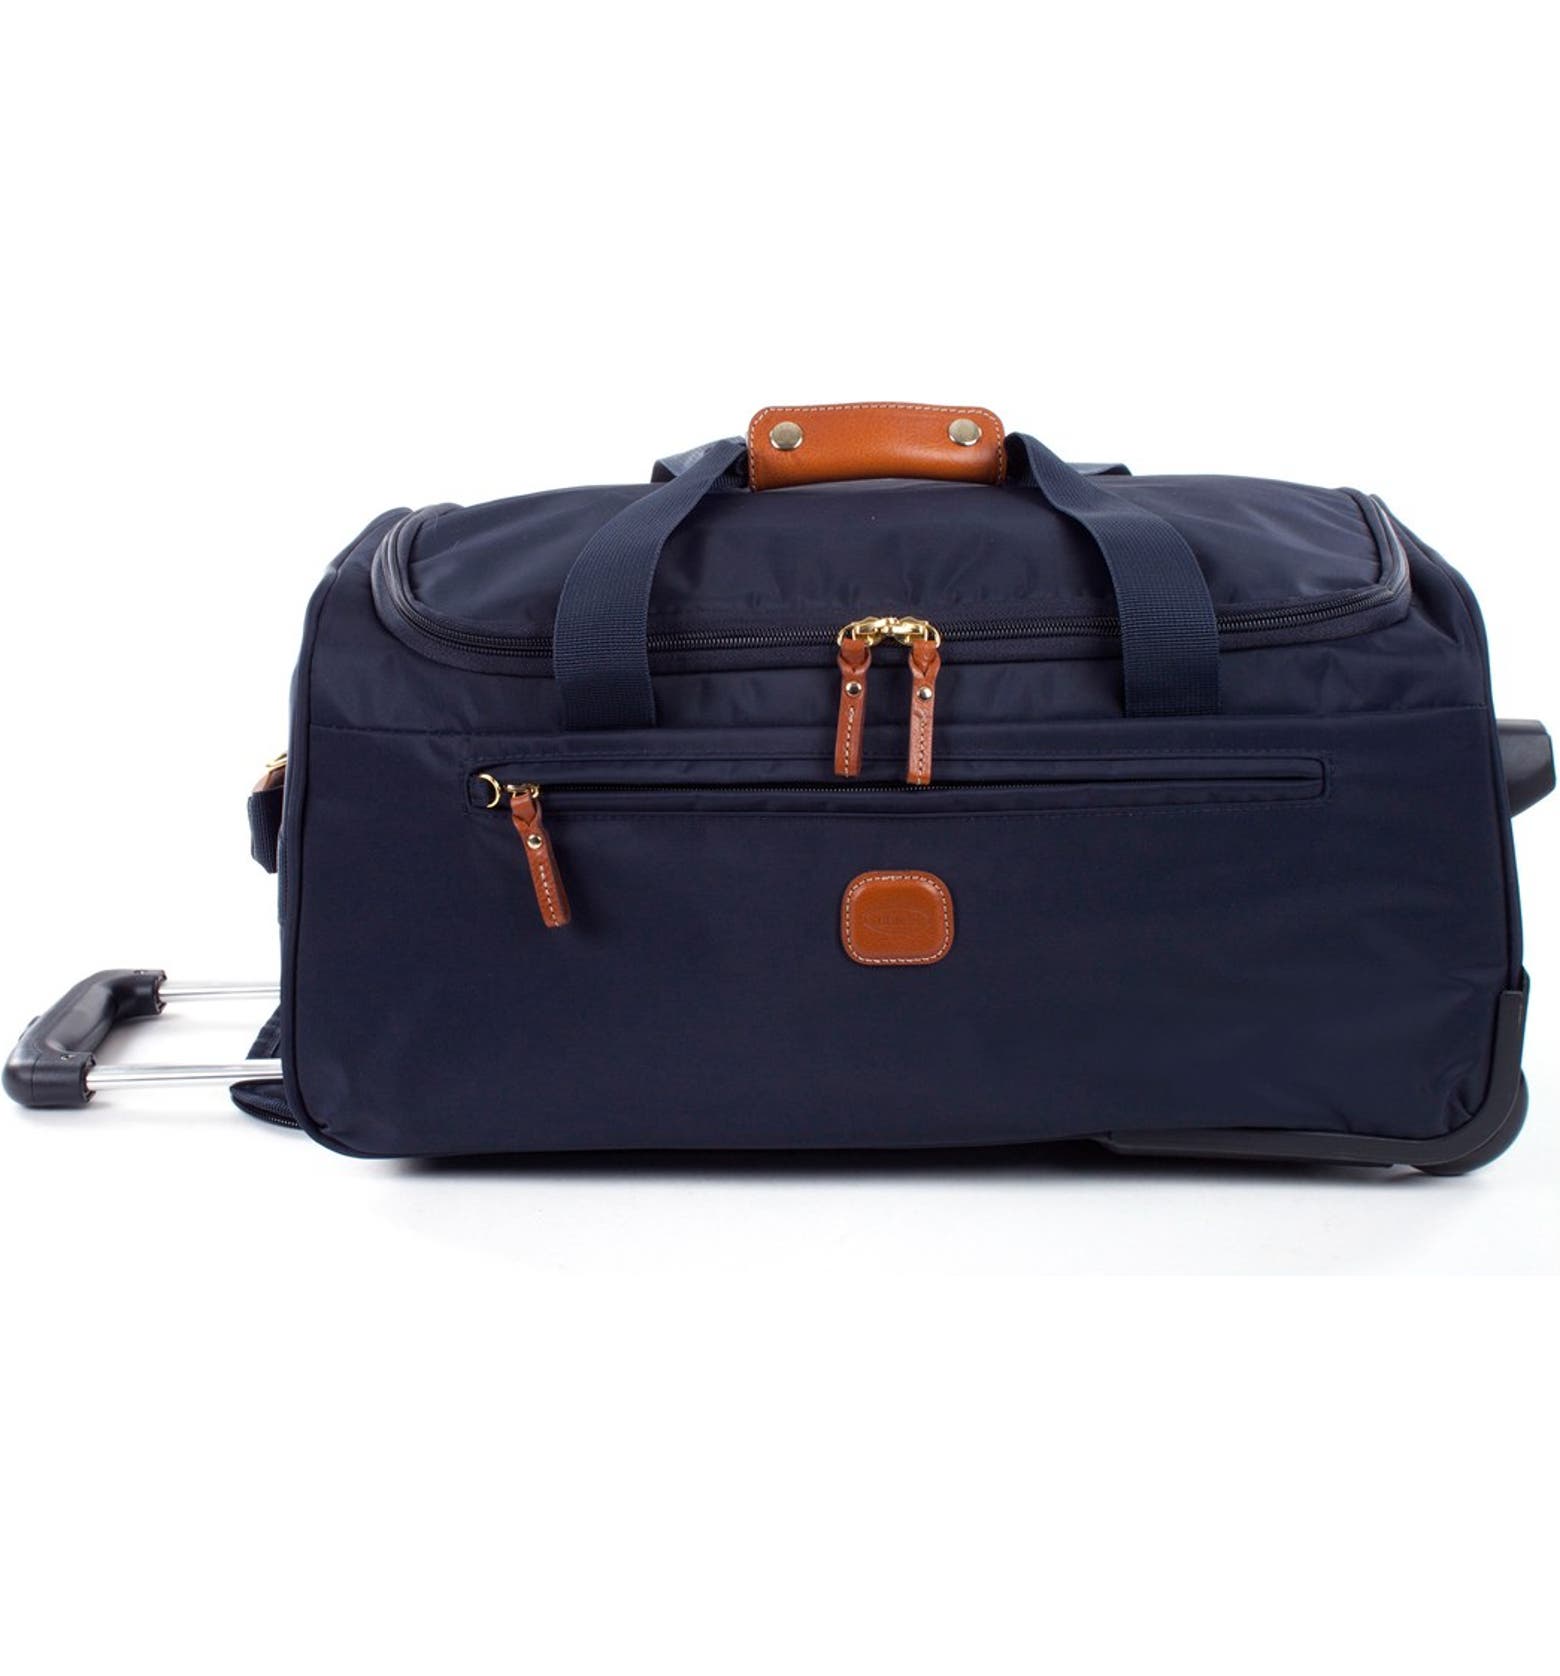 Brics X-Bag 21-Inch Rolling Carry-On Duffle Bag | Nordstrom